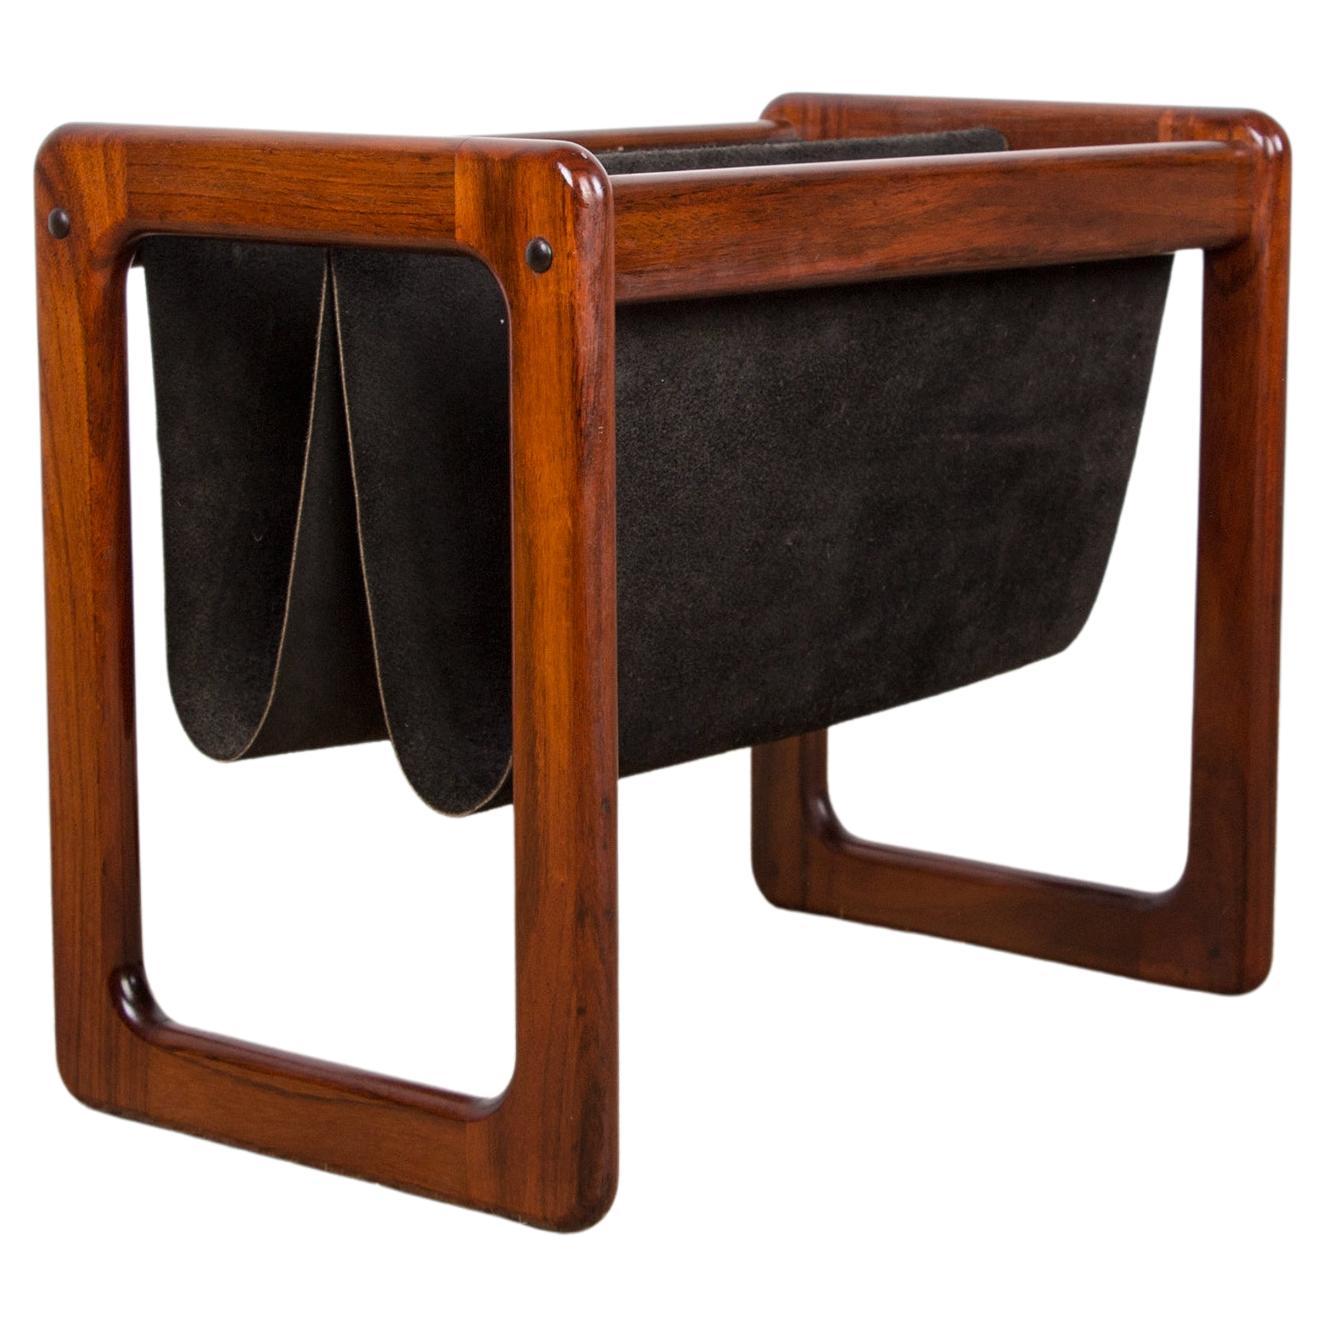 Rosewood and Leather Nesting Tables by Brabantia, The Netherlands ...